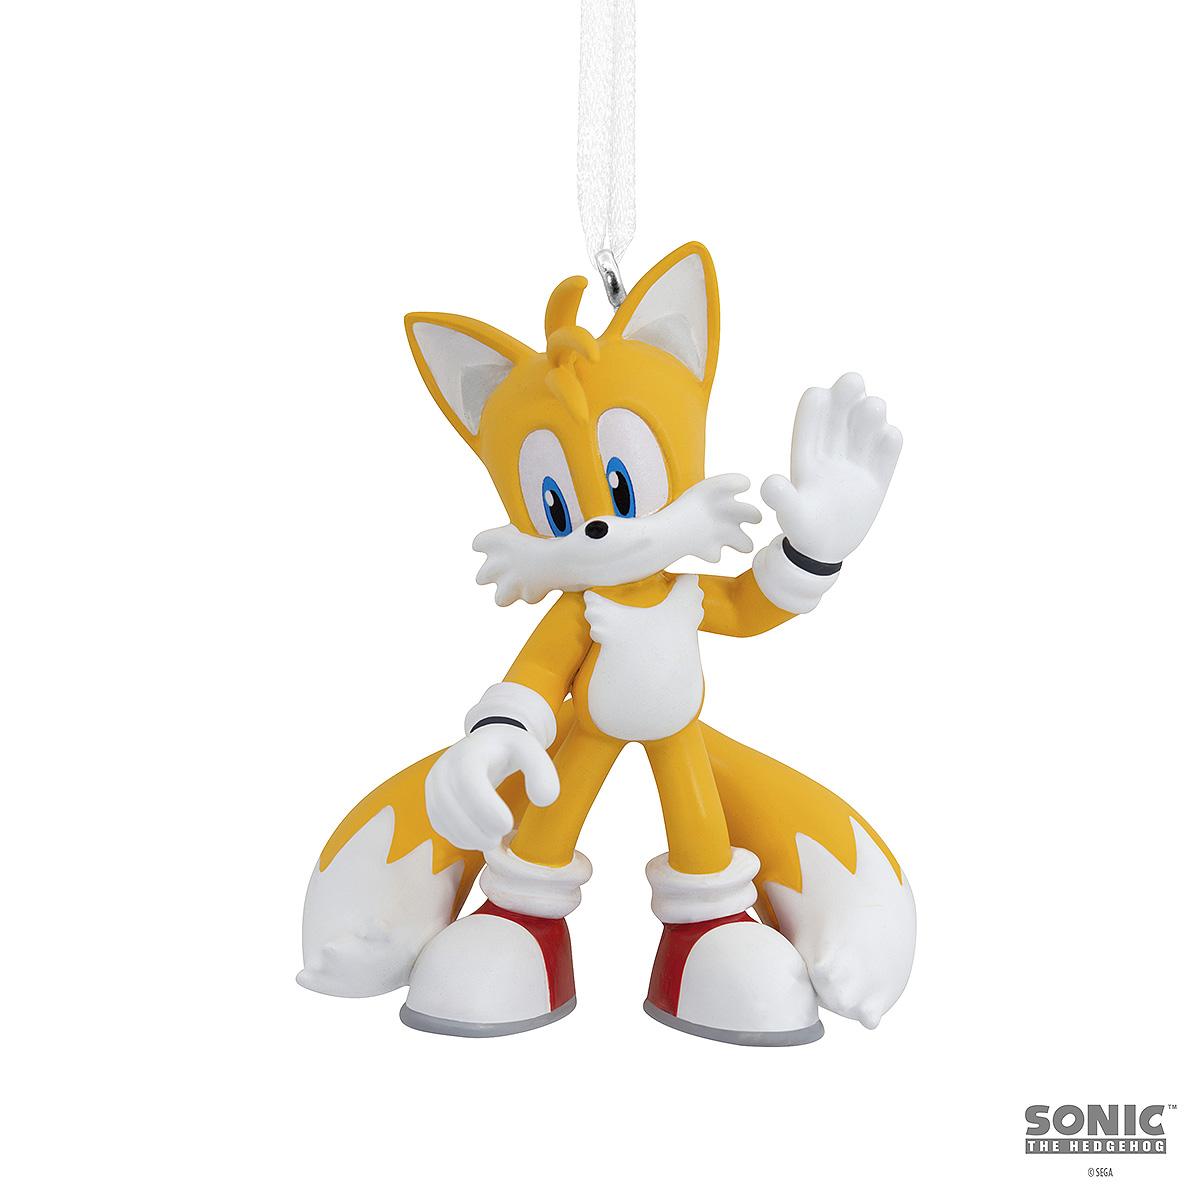 Tails, Sonic The Hedgehog Ornament